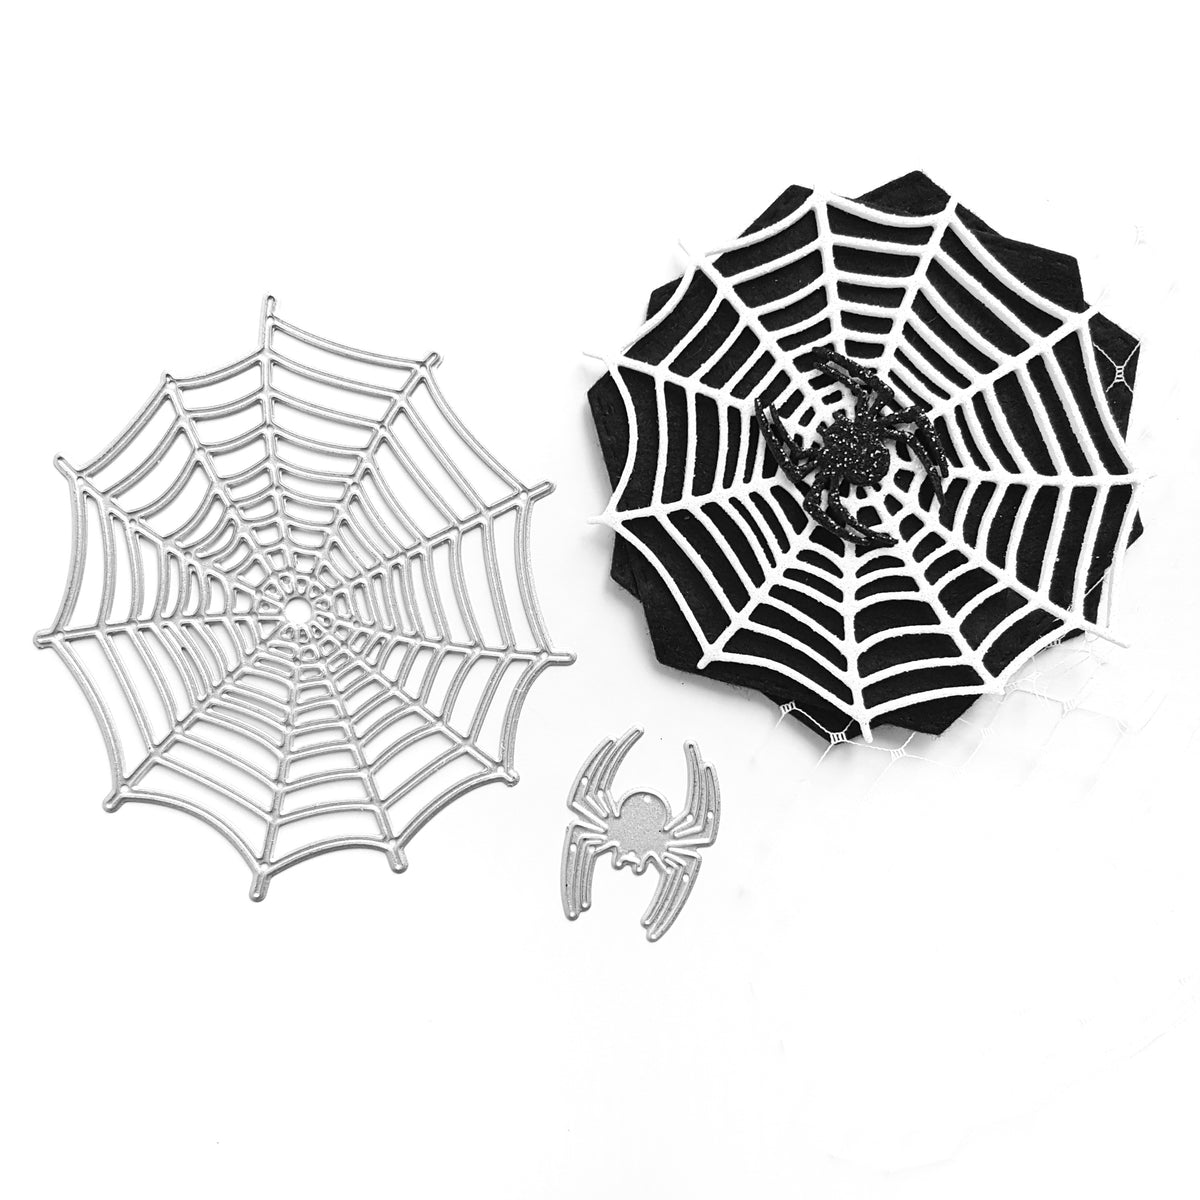 Spider web with spider die cut Embellishments 5 sets/ 10 pc black card stock…